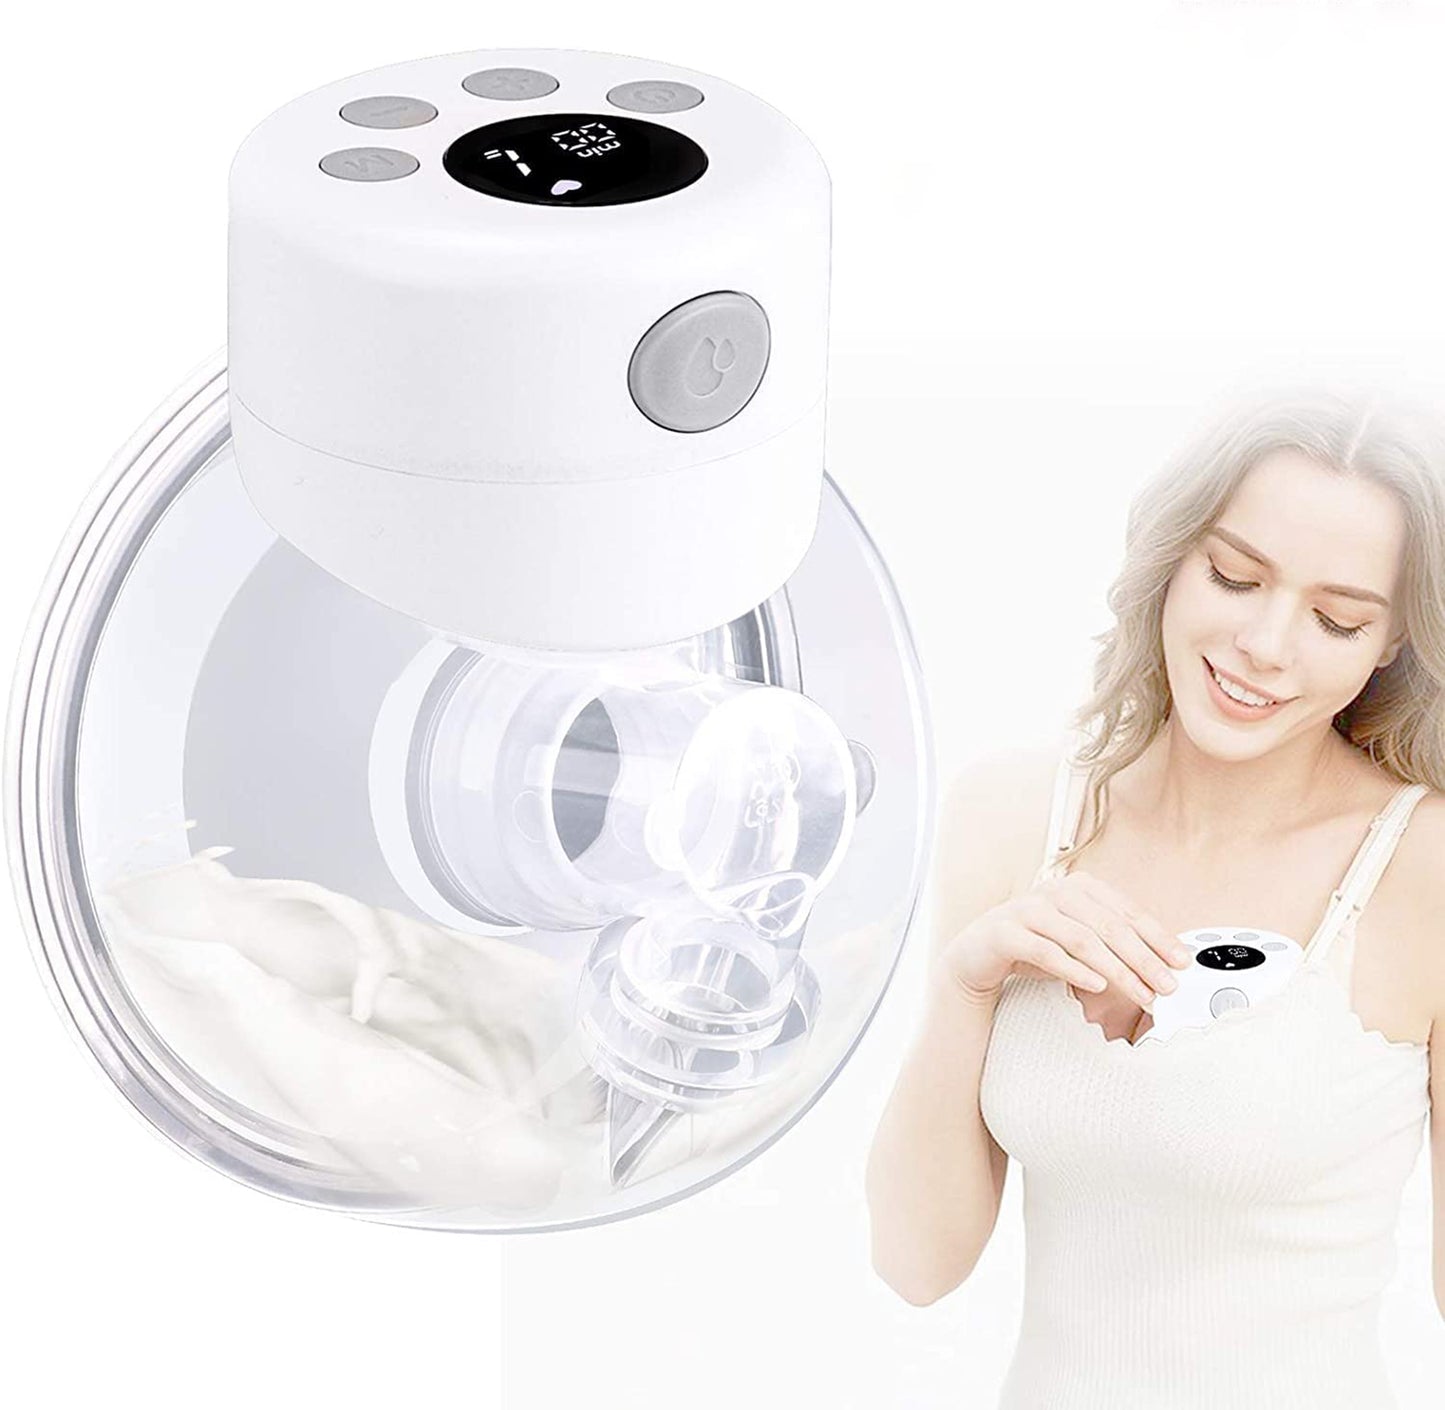 2-Pcs Mamomy S12 Wearable Breast Pump, Electric Breast Pump, Hands Free Breast Feeding Pump, Portable Breast Pump with 9 Levels 24MM